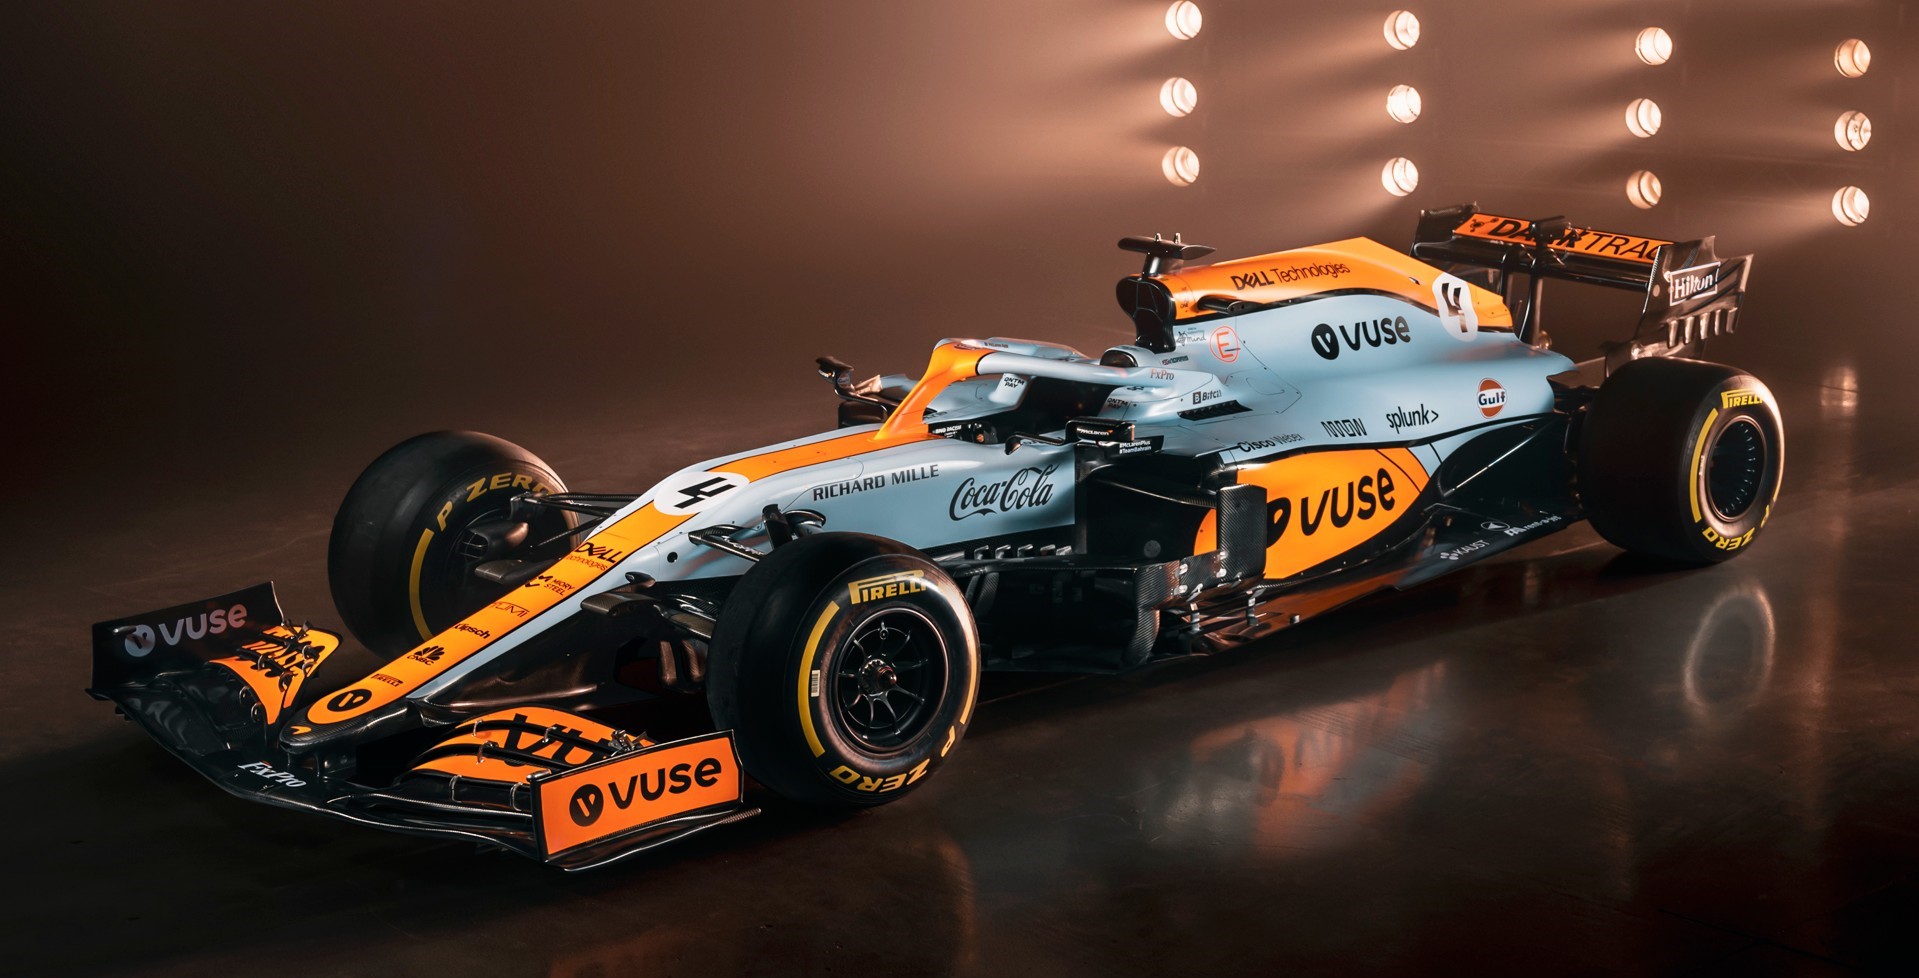 Reason why Norris and Ricciardo cars have different colour patterns for Monaco GP